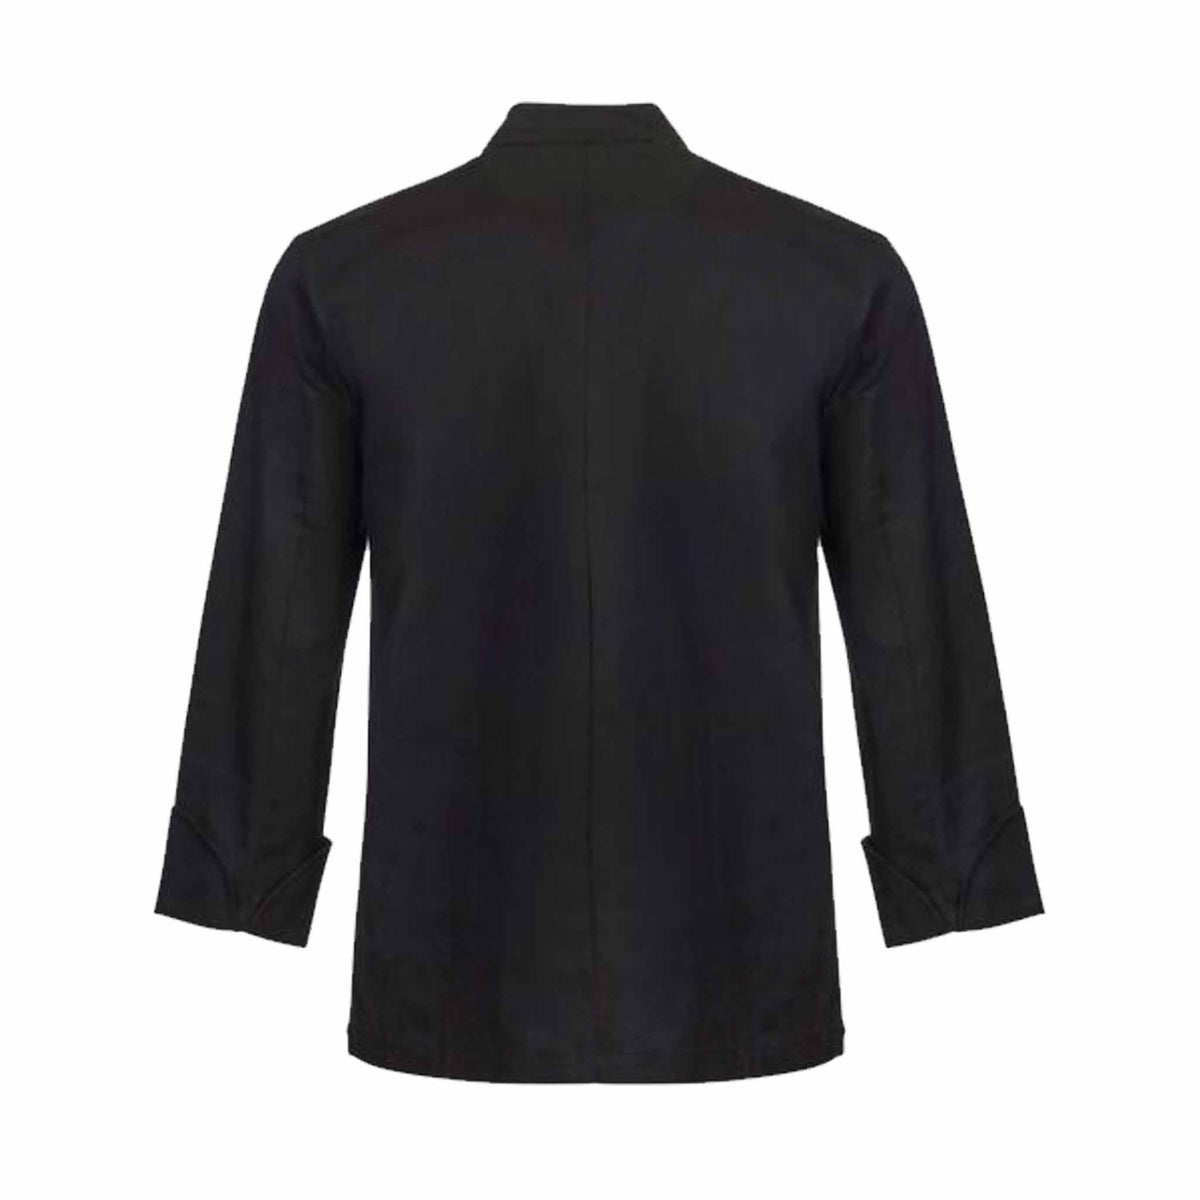 black long sleeve chefs jacket back view